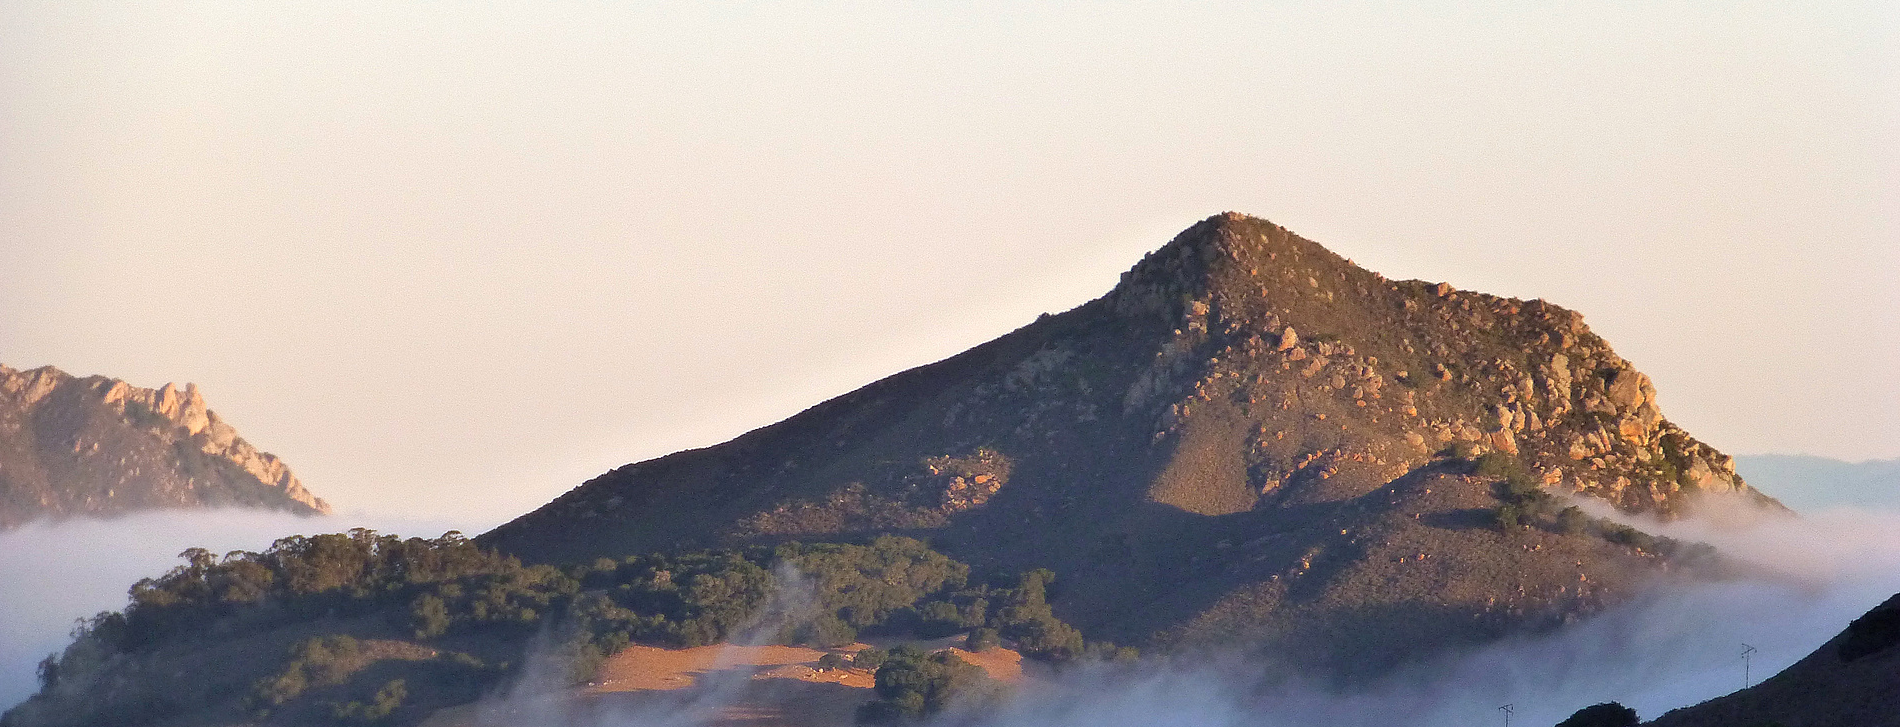 A picture of a local mountain, Cerro Romauldo, at sunset.